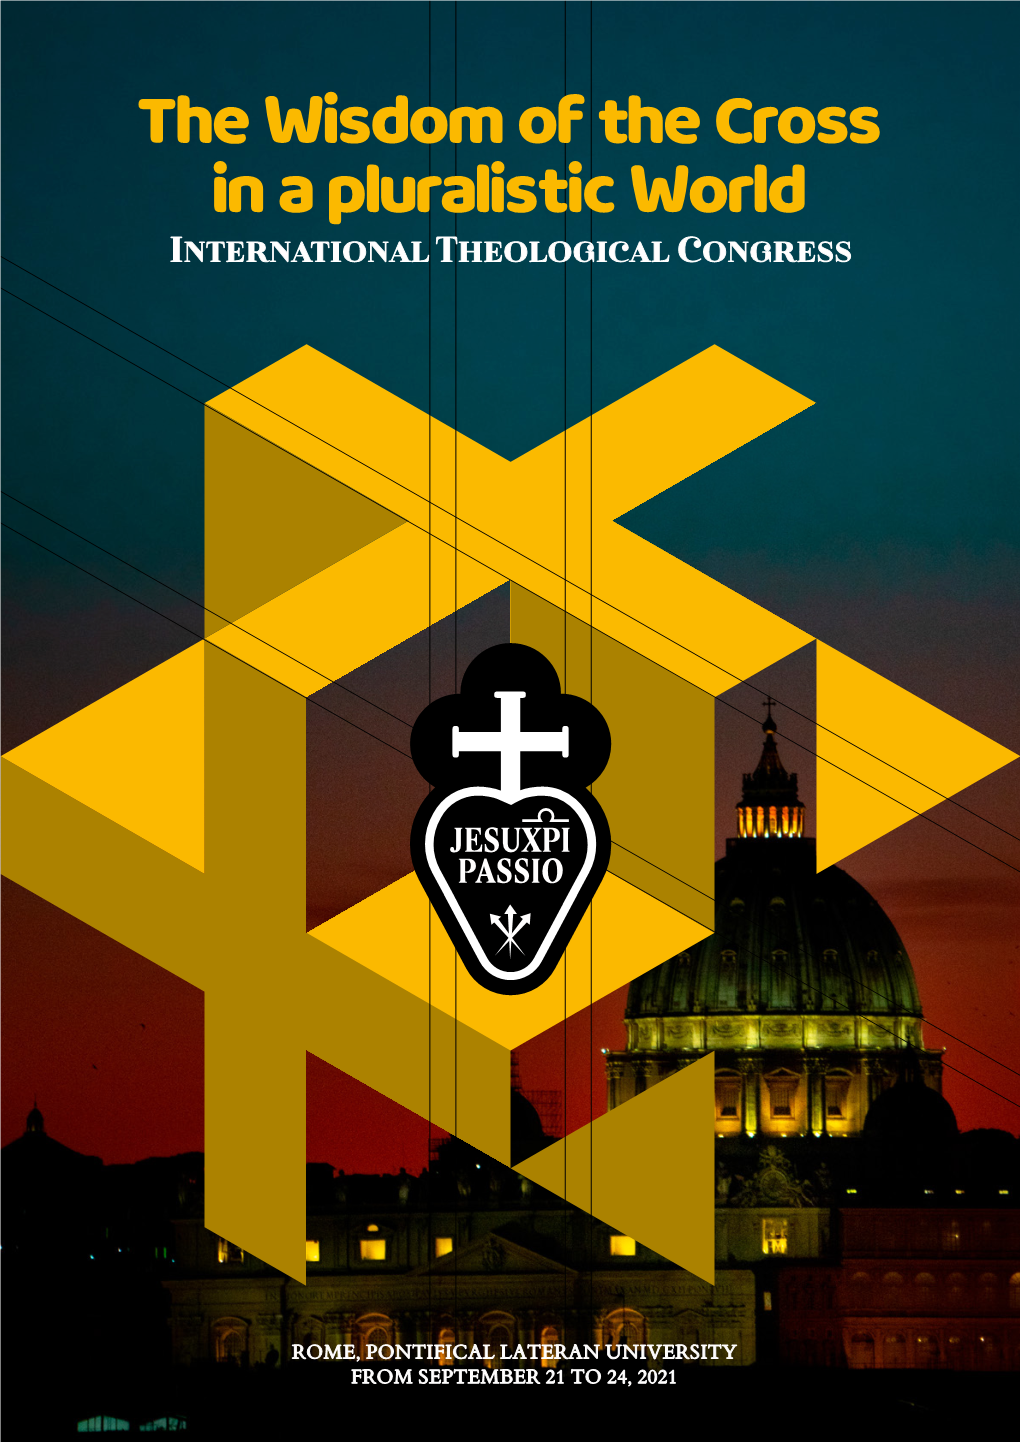 The Wisdom of the Cross in a Pluralistic World International Theological Congress